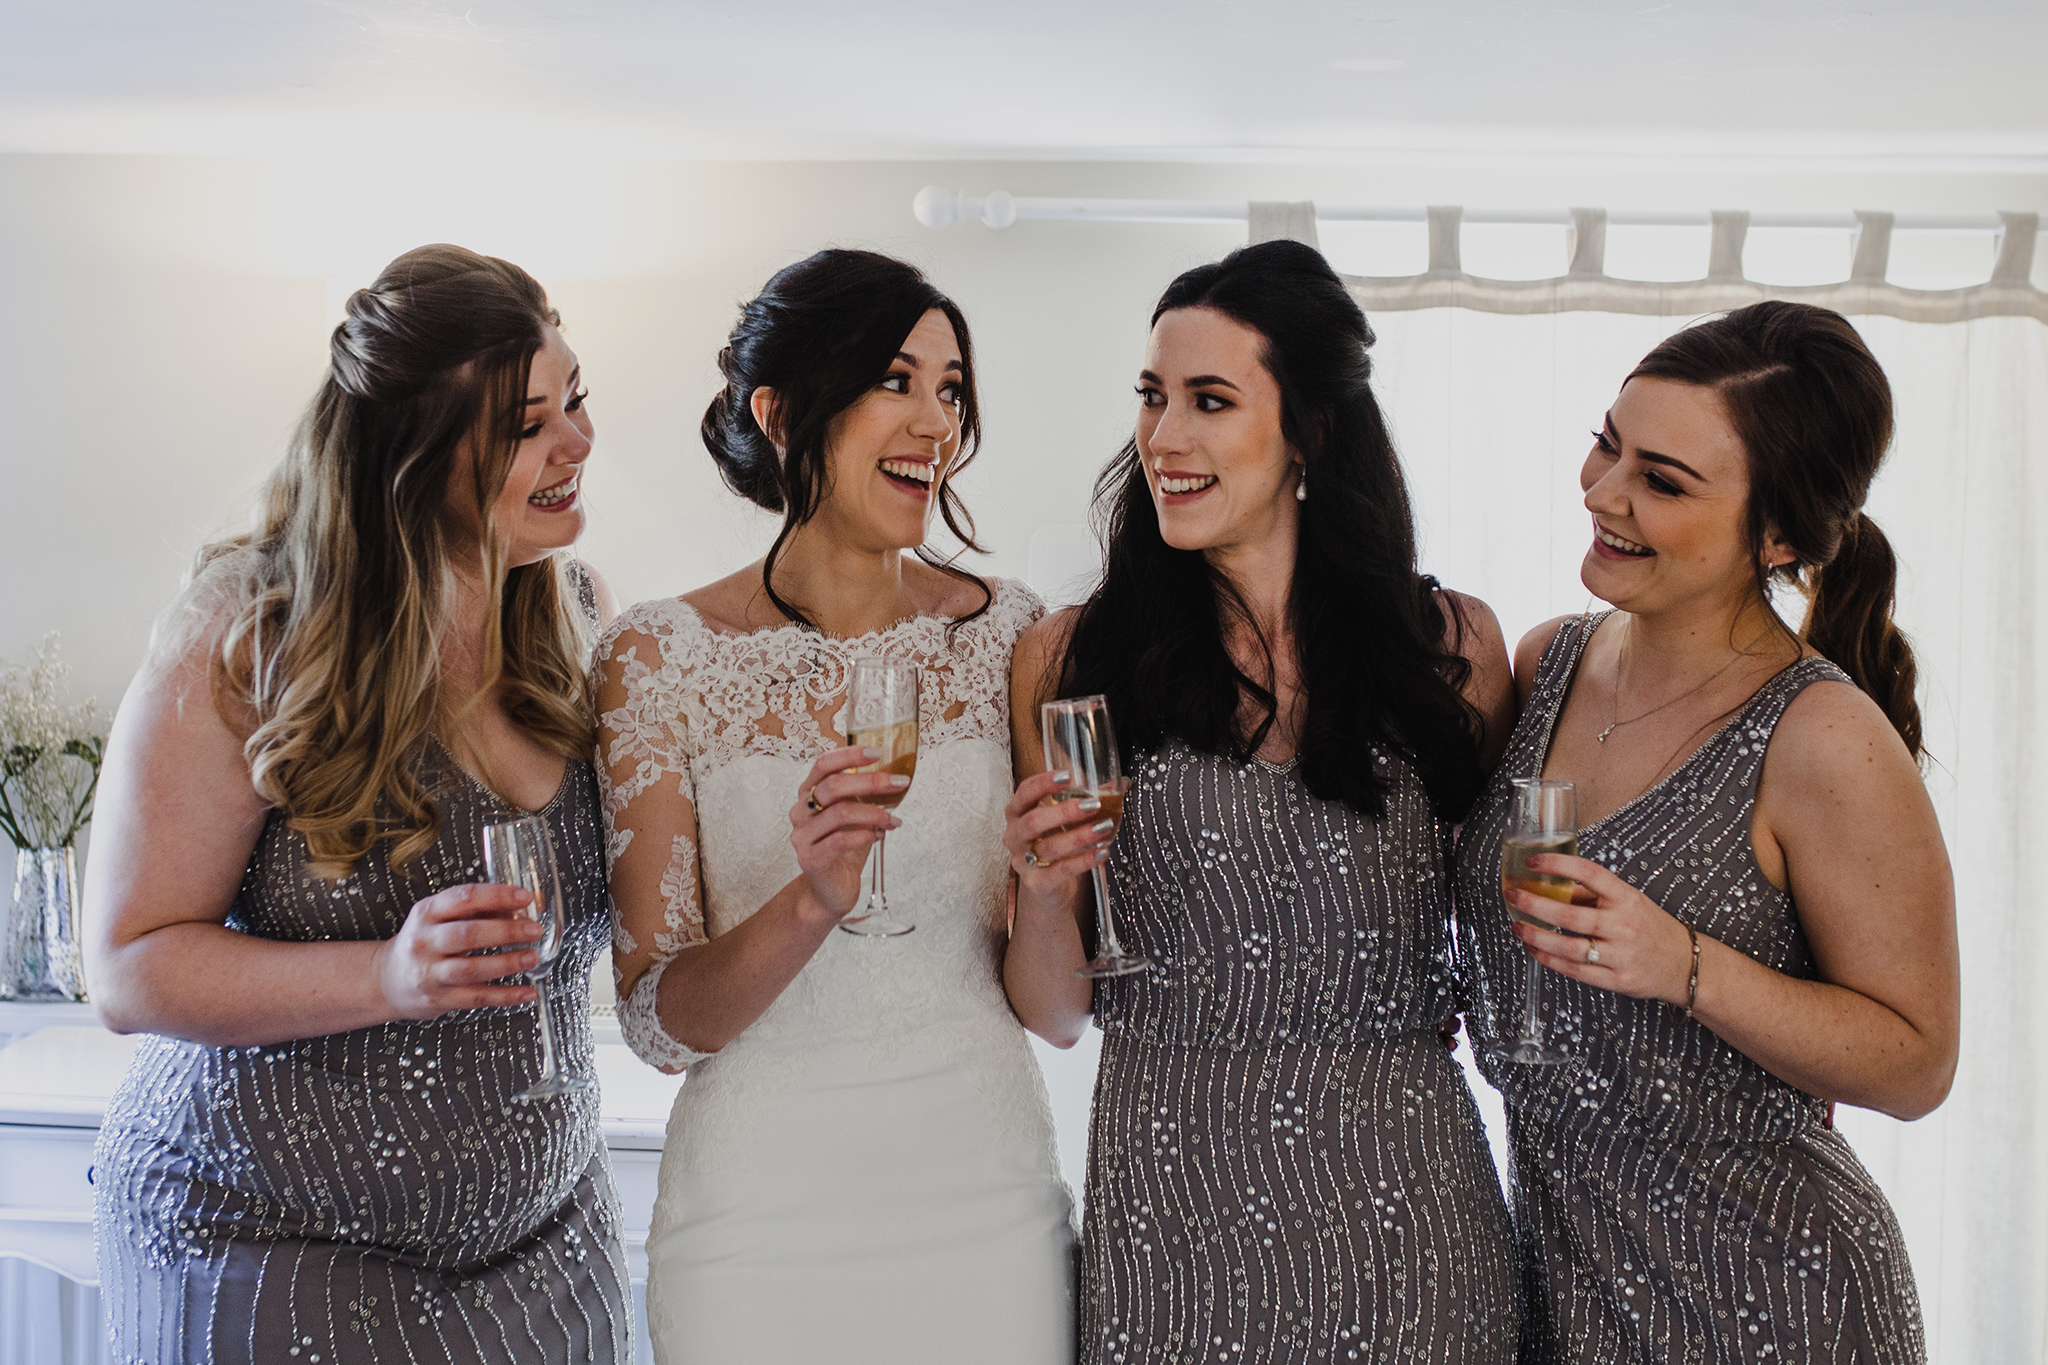 Bride and bridesmaids toasting and being happy in a hotel room